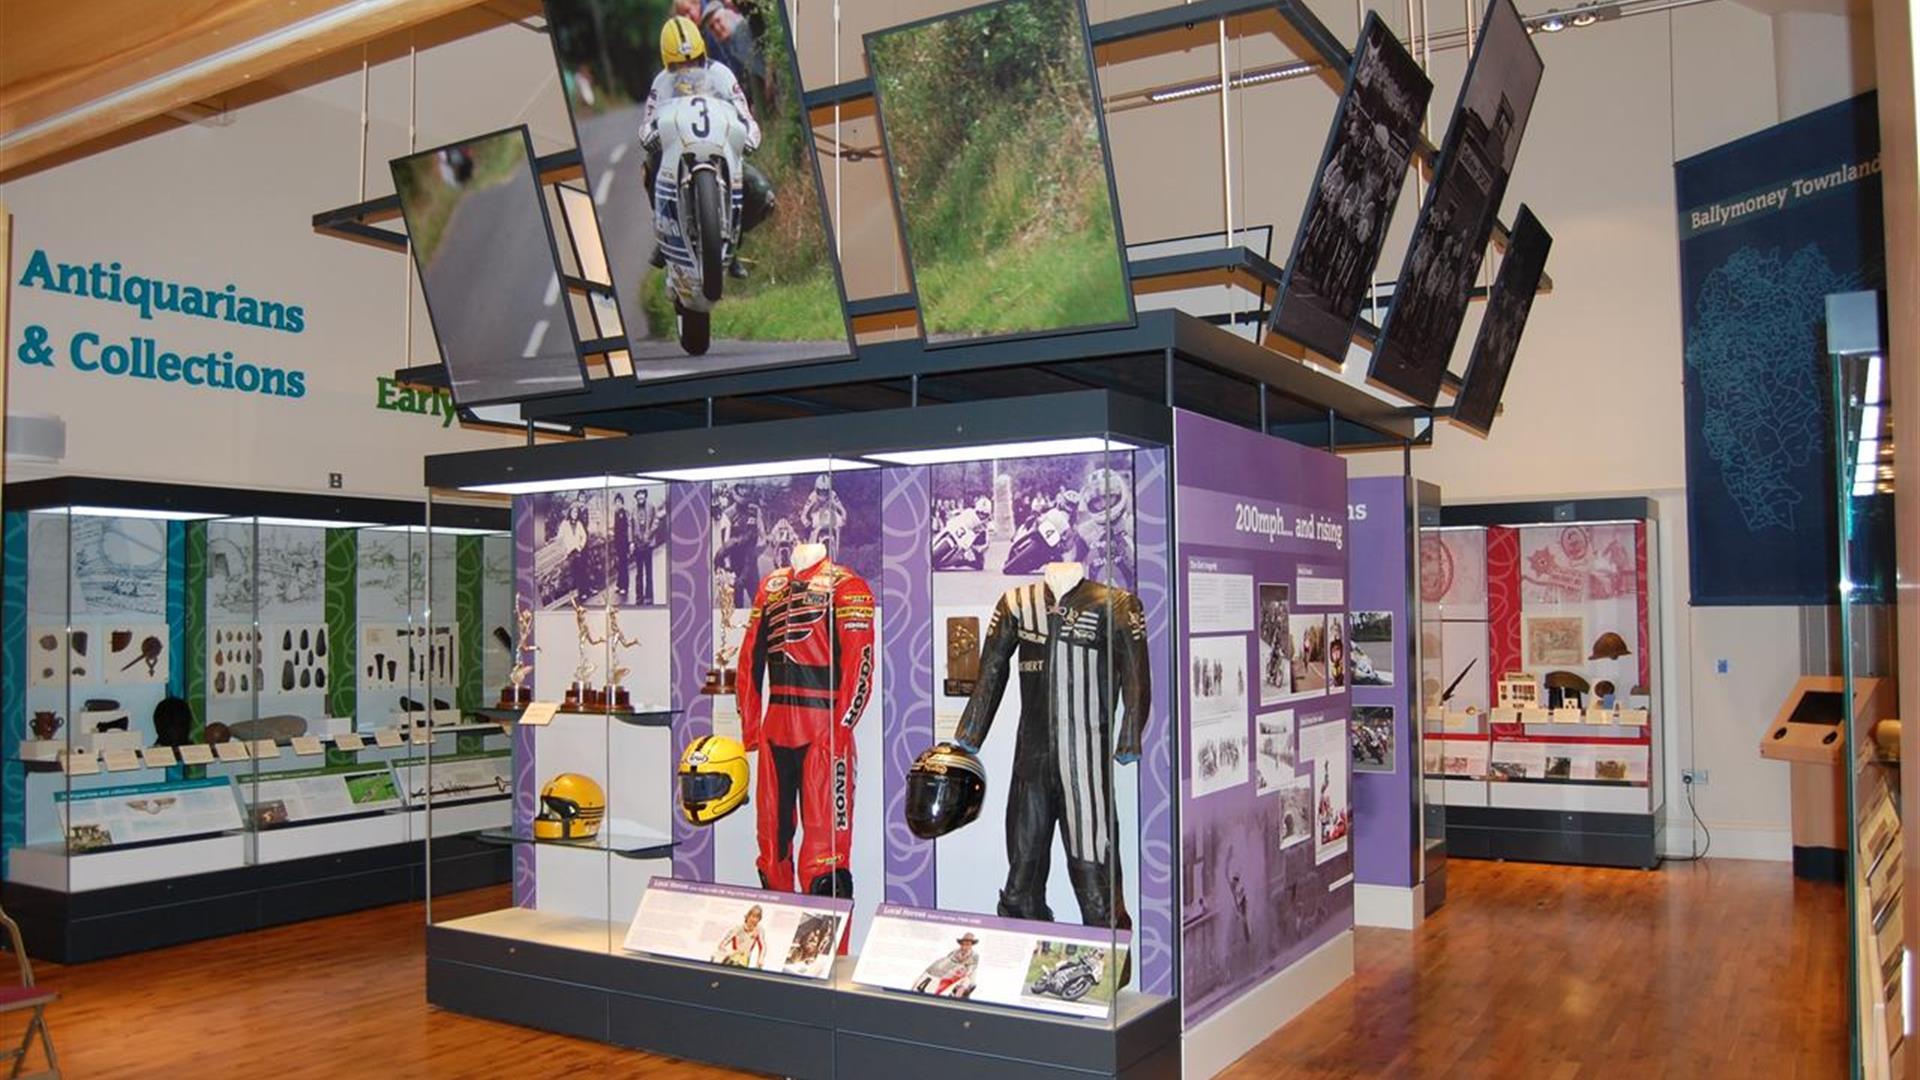 A glazed exhibition space showing racing gear worn by the face road motorbike racer Joey Dunlop